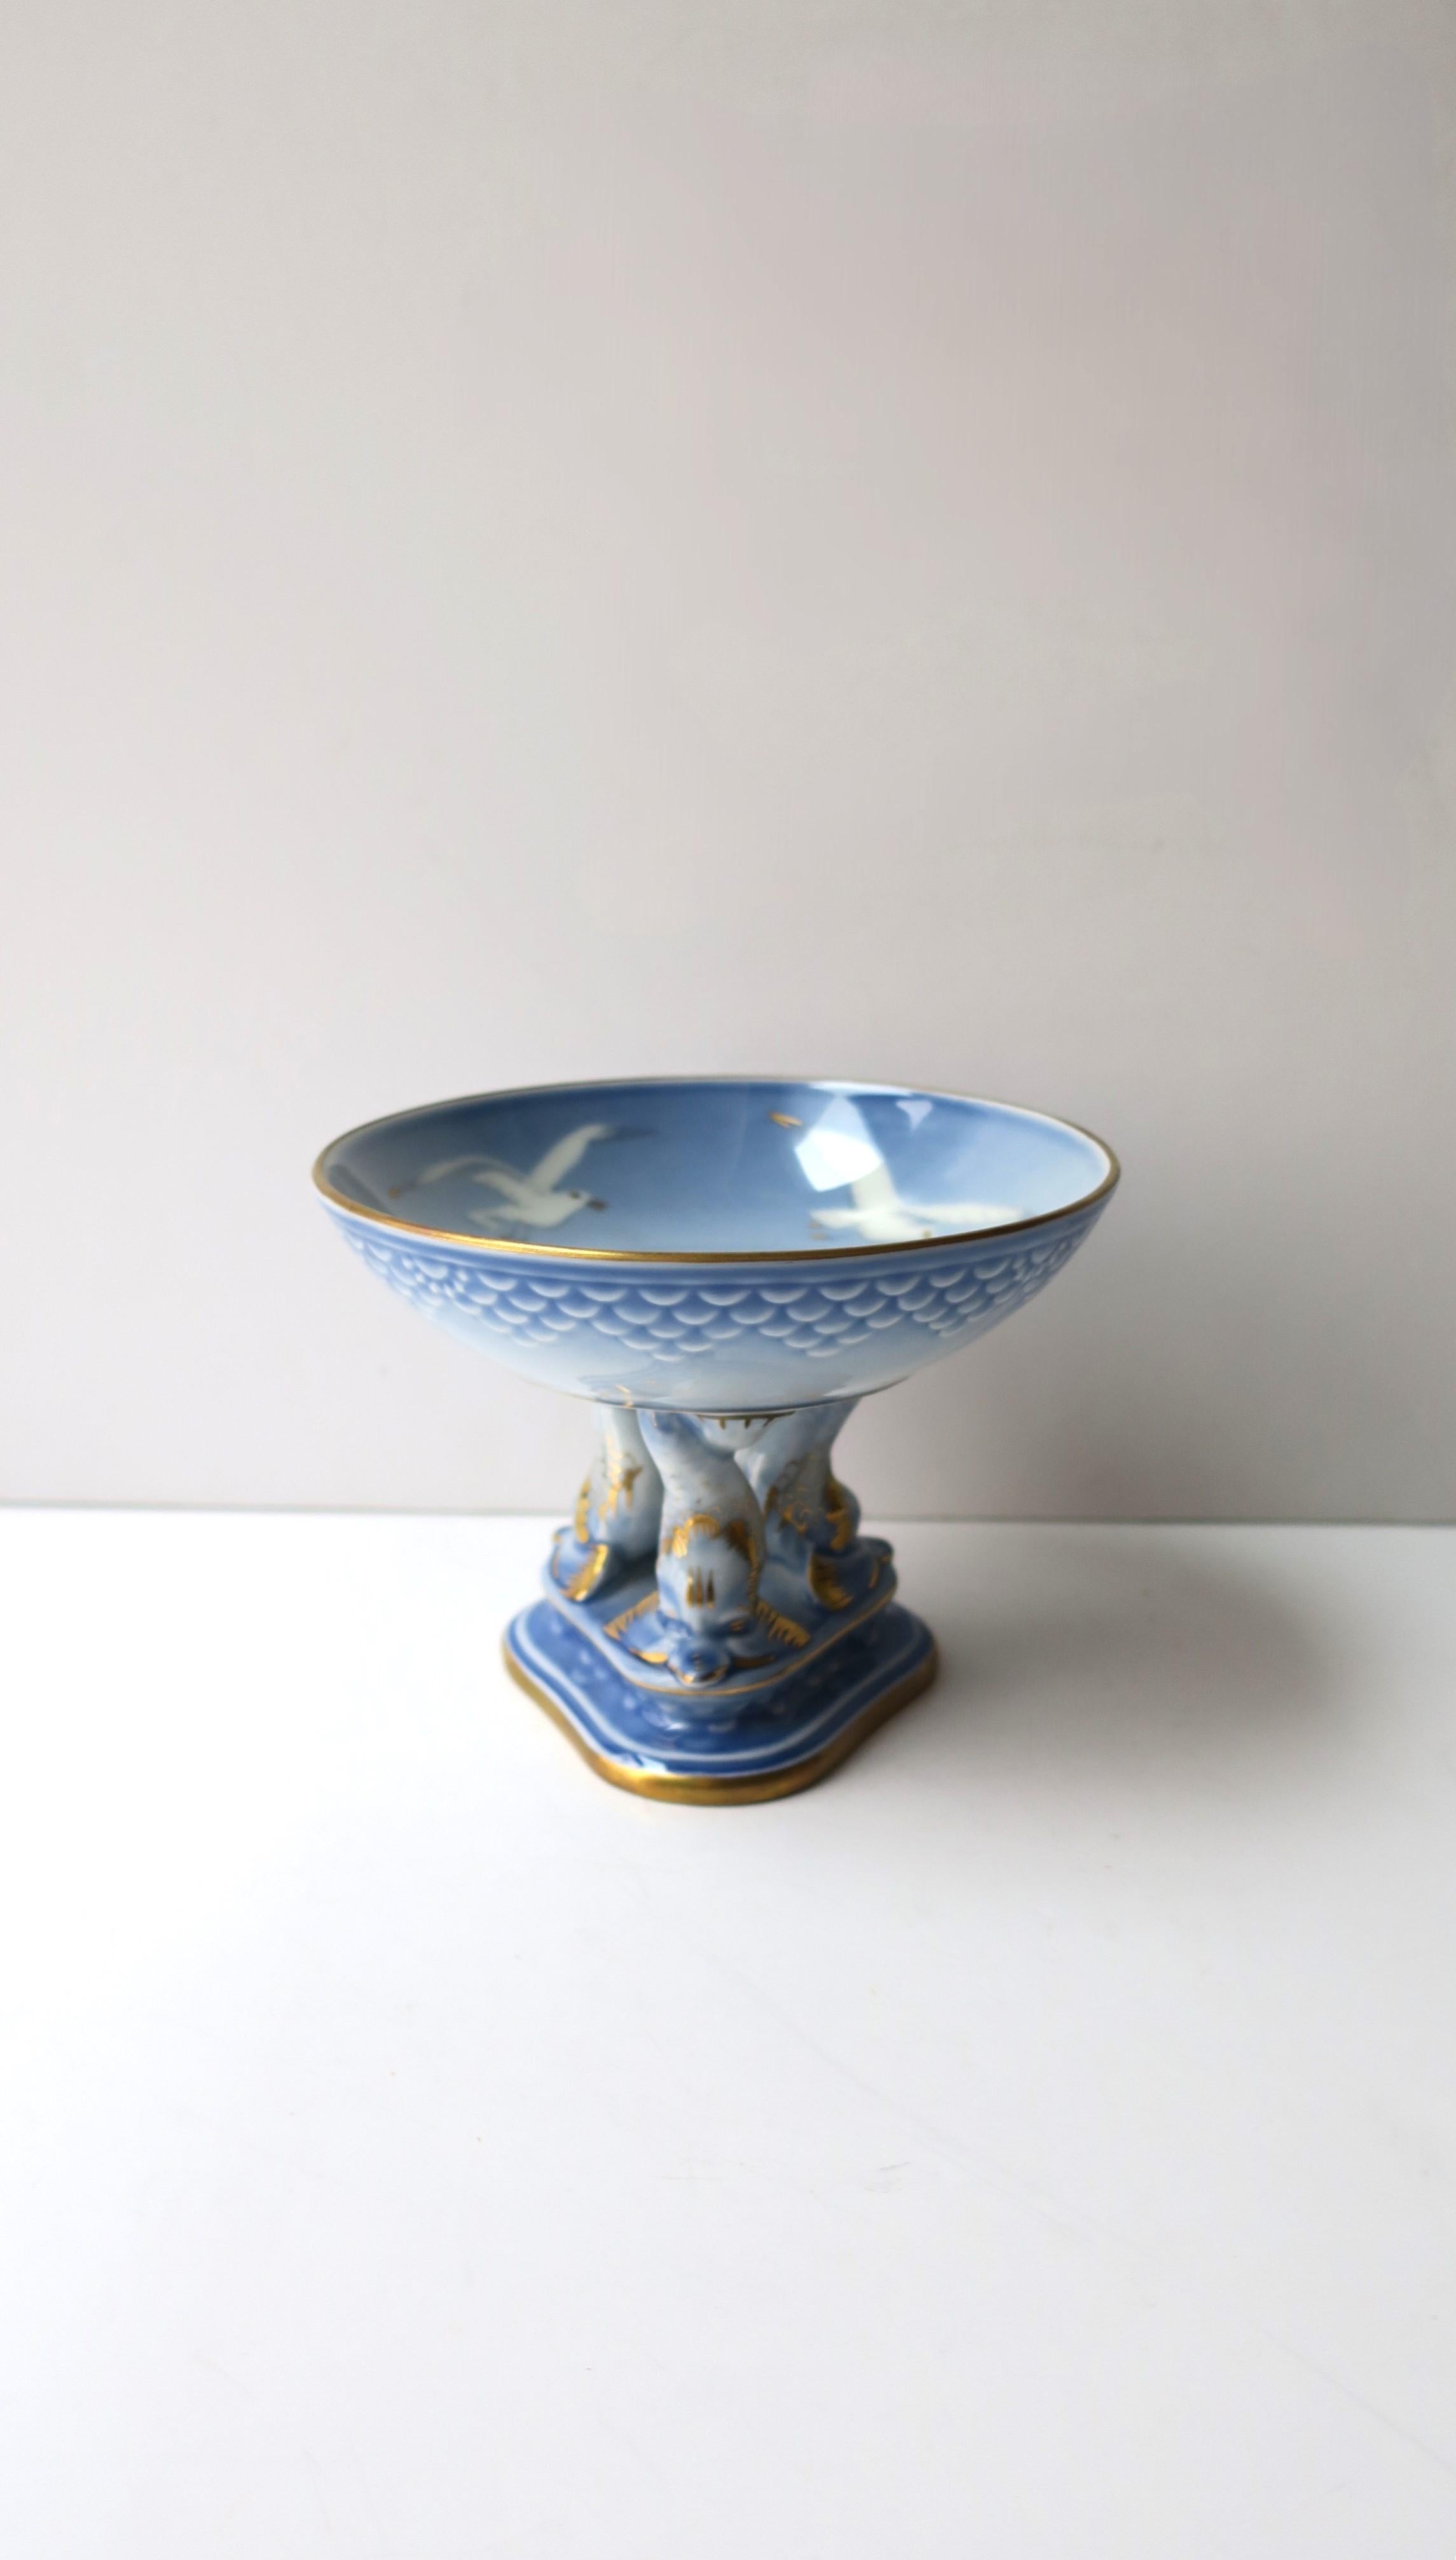 Scandinavian Modern Porcelain Compote By Bing and Grondahl For Sale